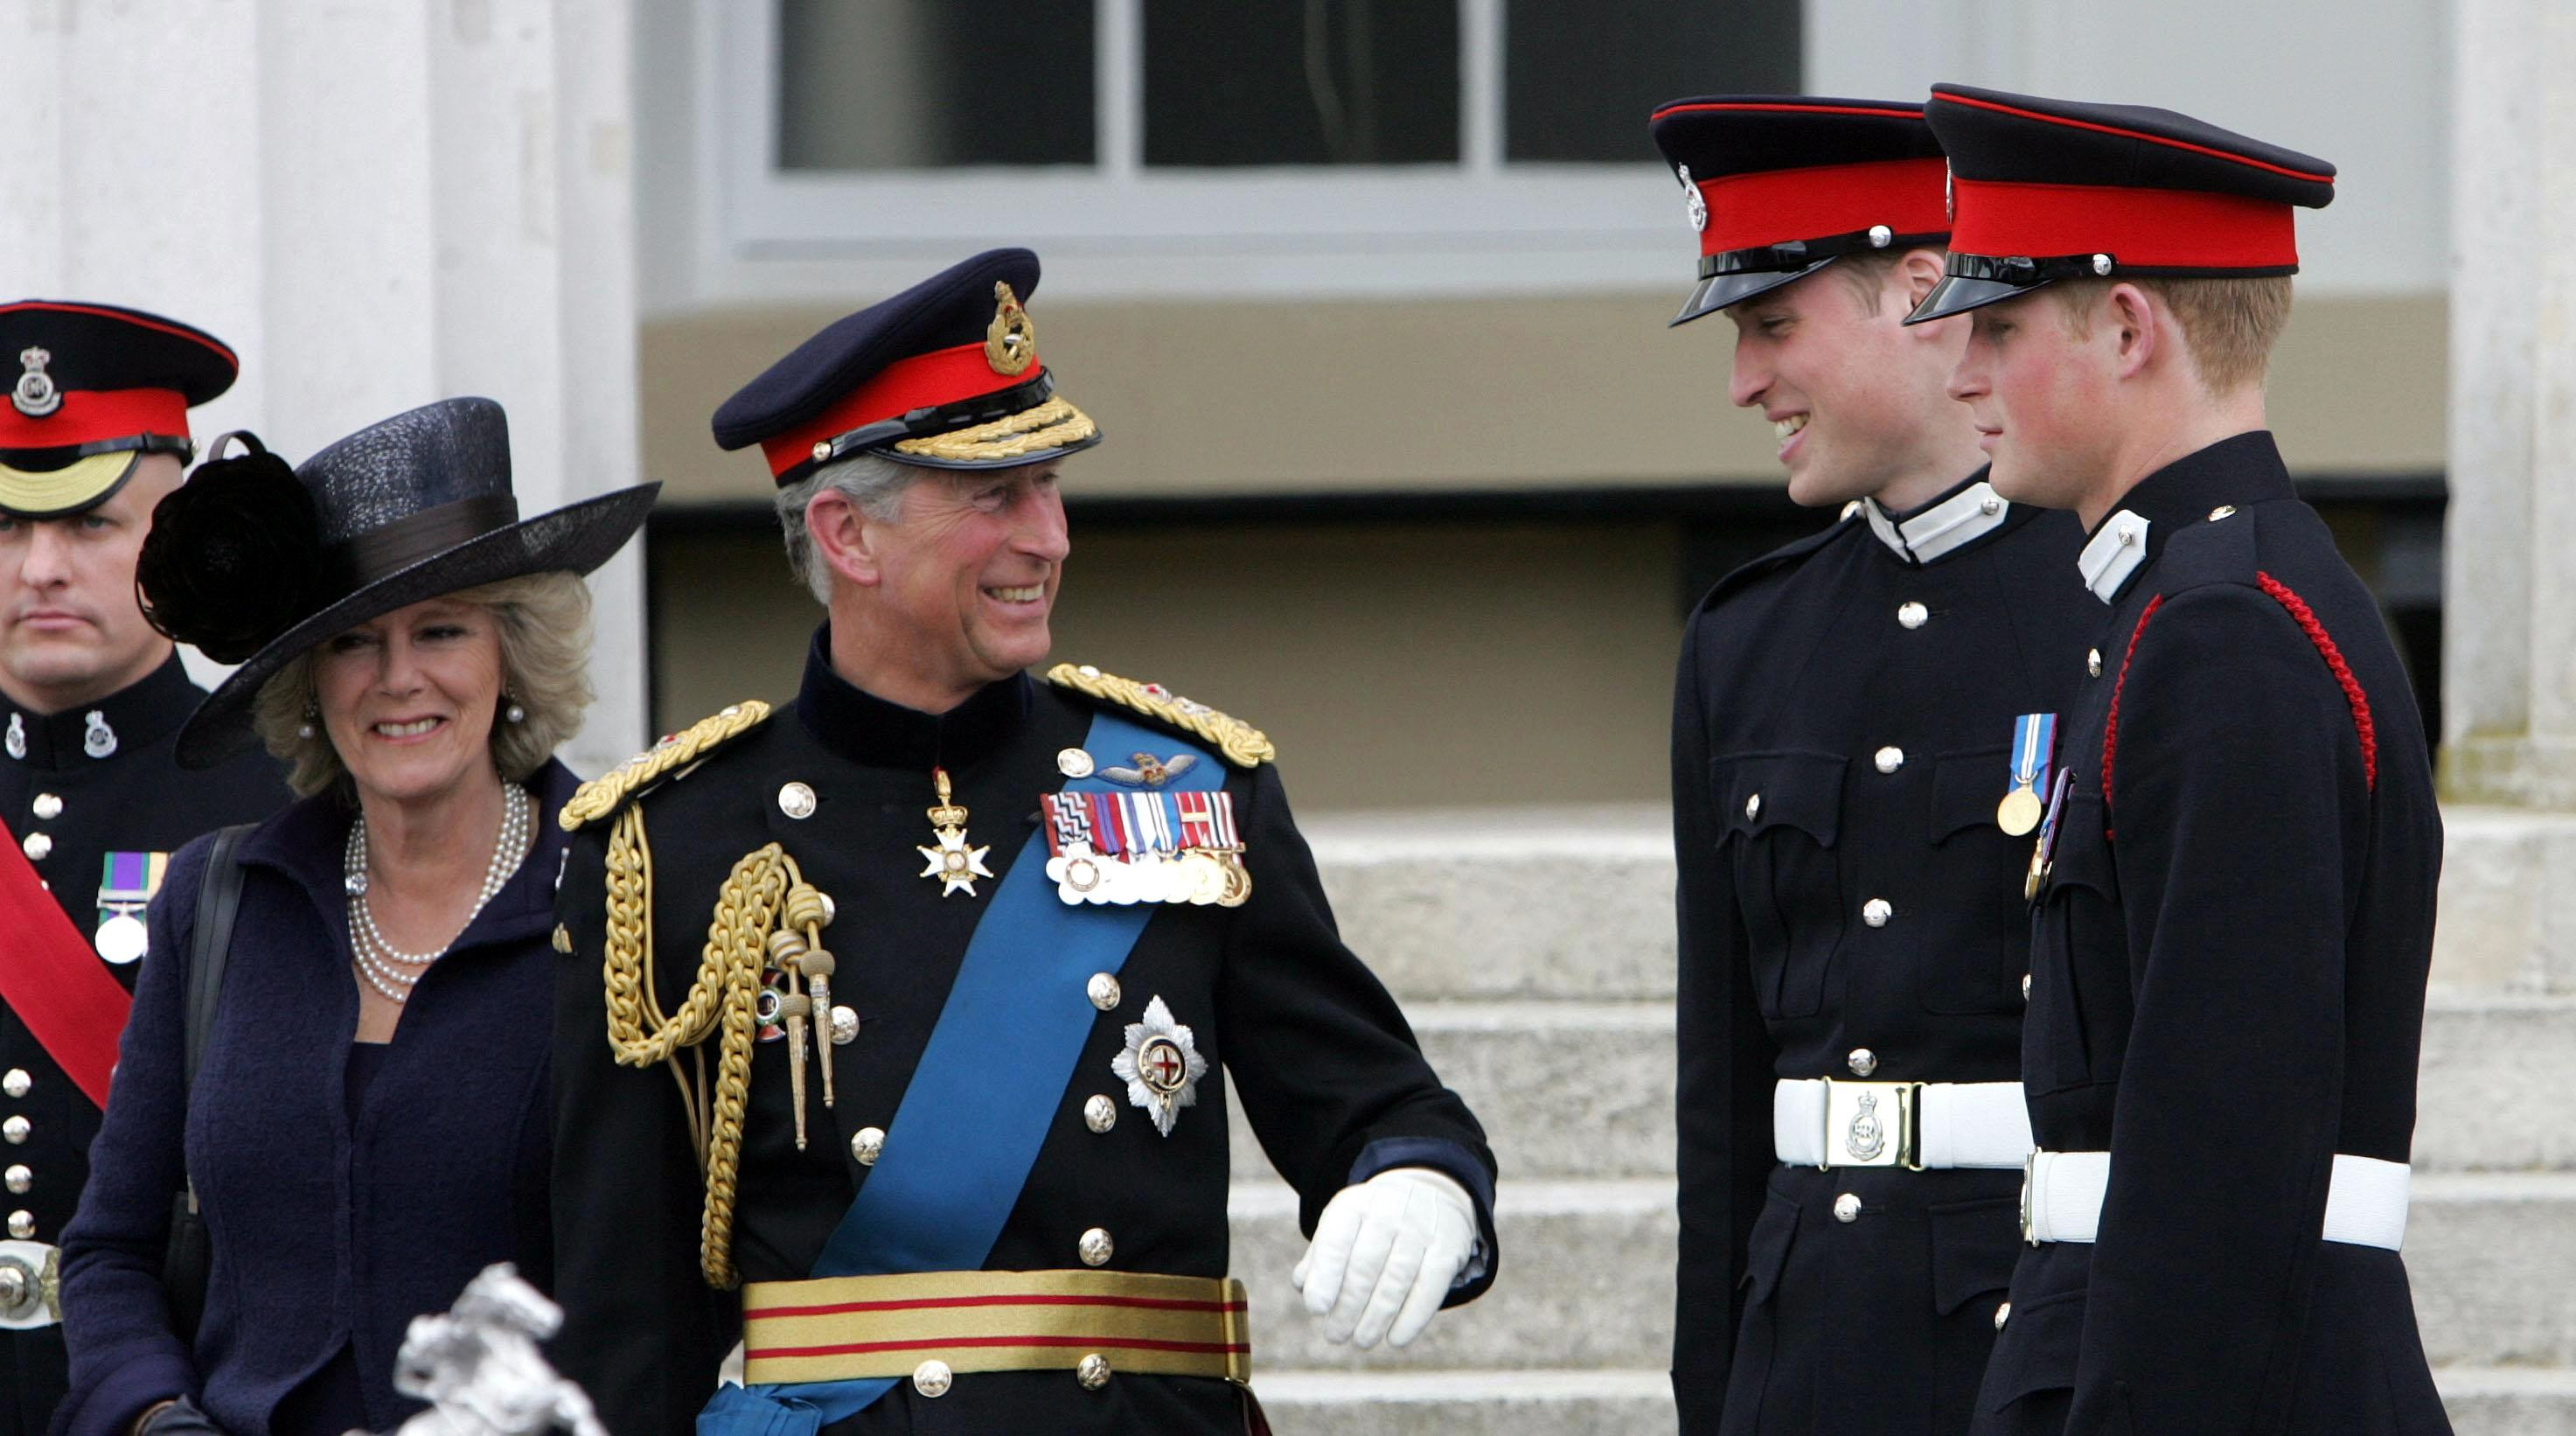 The Prince of Wales and the Duchess of Cornwall speaking to Prince William and Prince Harry before leaving Sandhurst Royal Military Academy after Harry's Sovereign's Parade